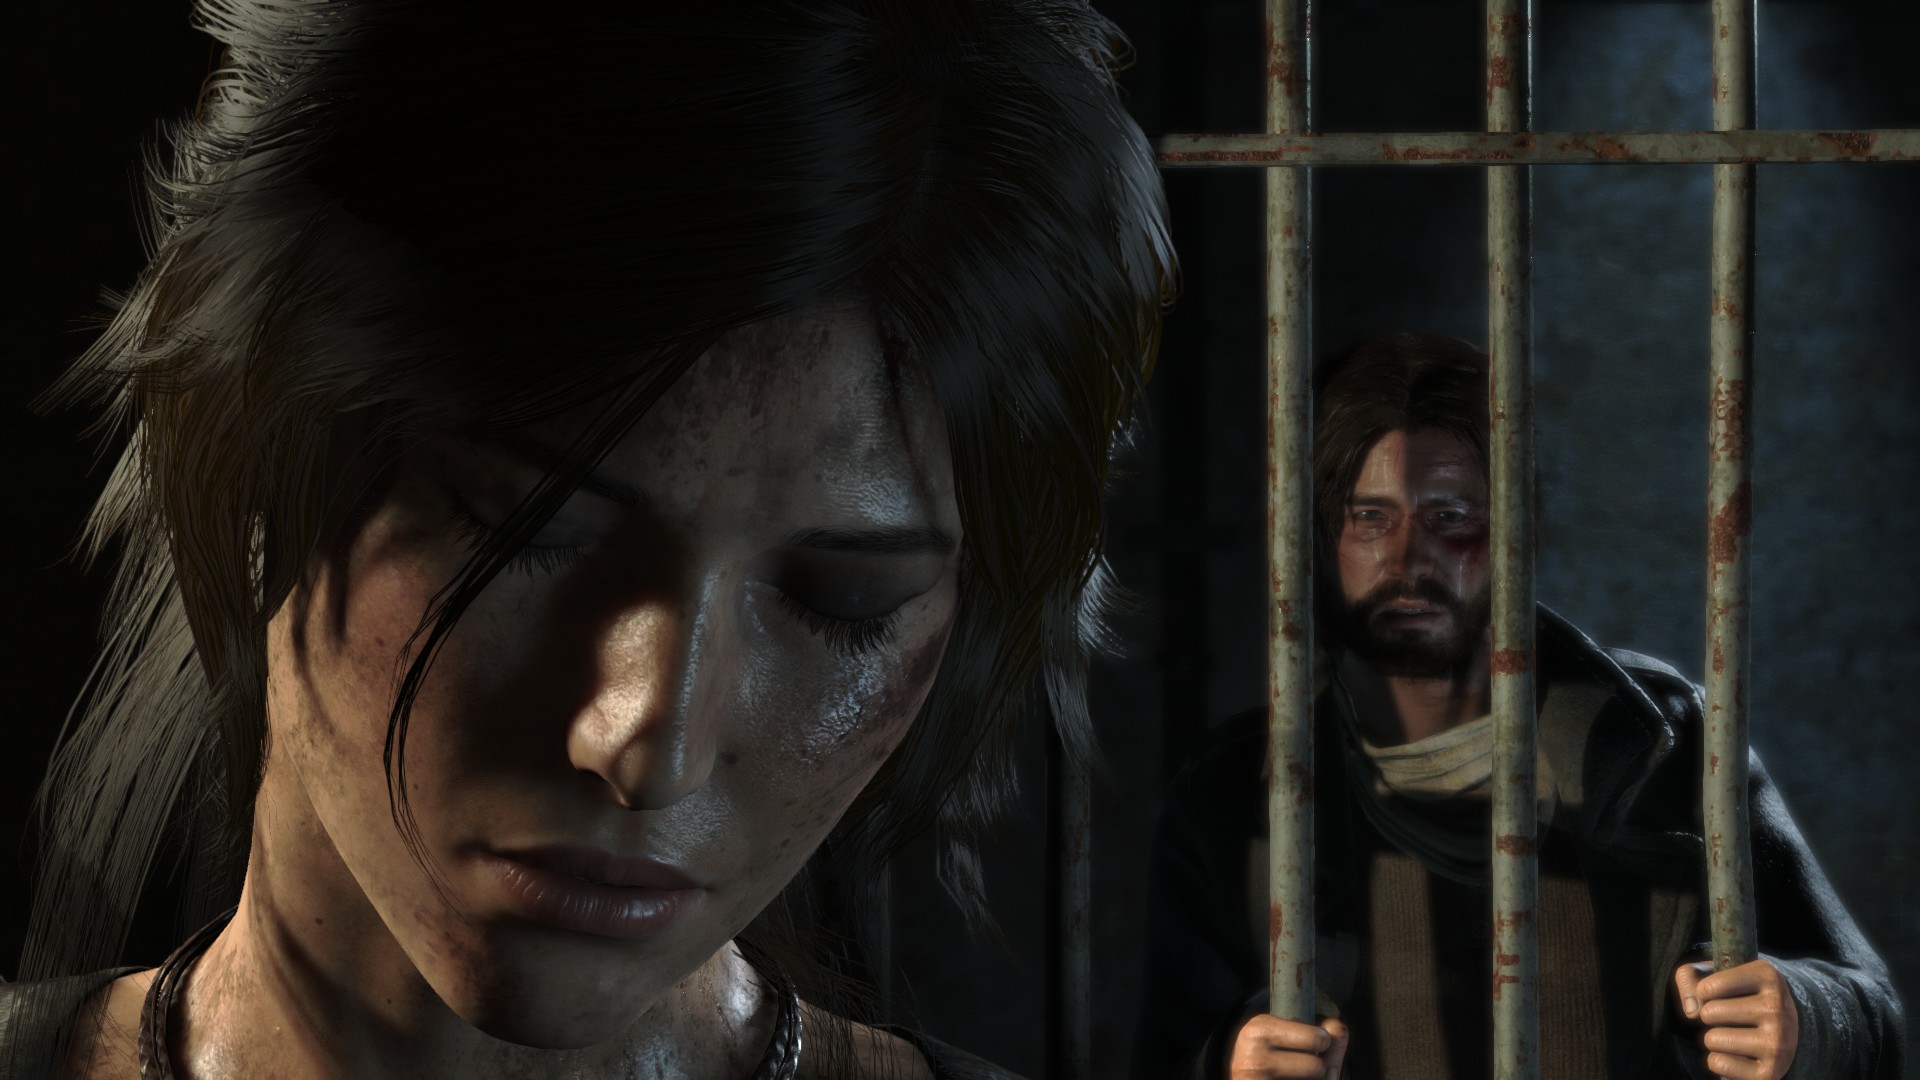 General 1920x1080 Rise of the Tomb Raider screen shot video games Lara Croft (Tomb Raider) PC gaming face hair in face closed eyes video game girls video game characters